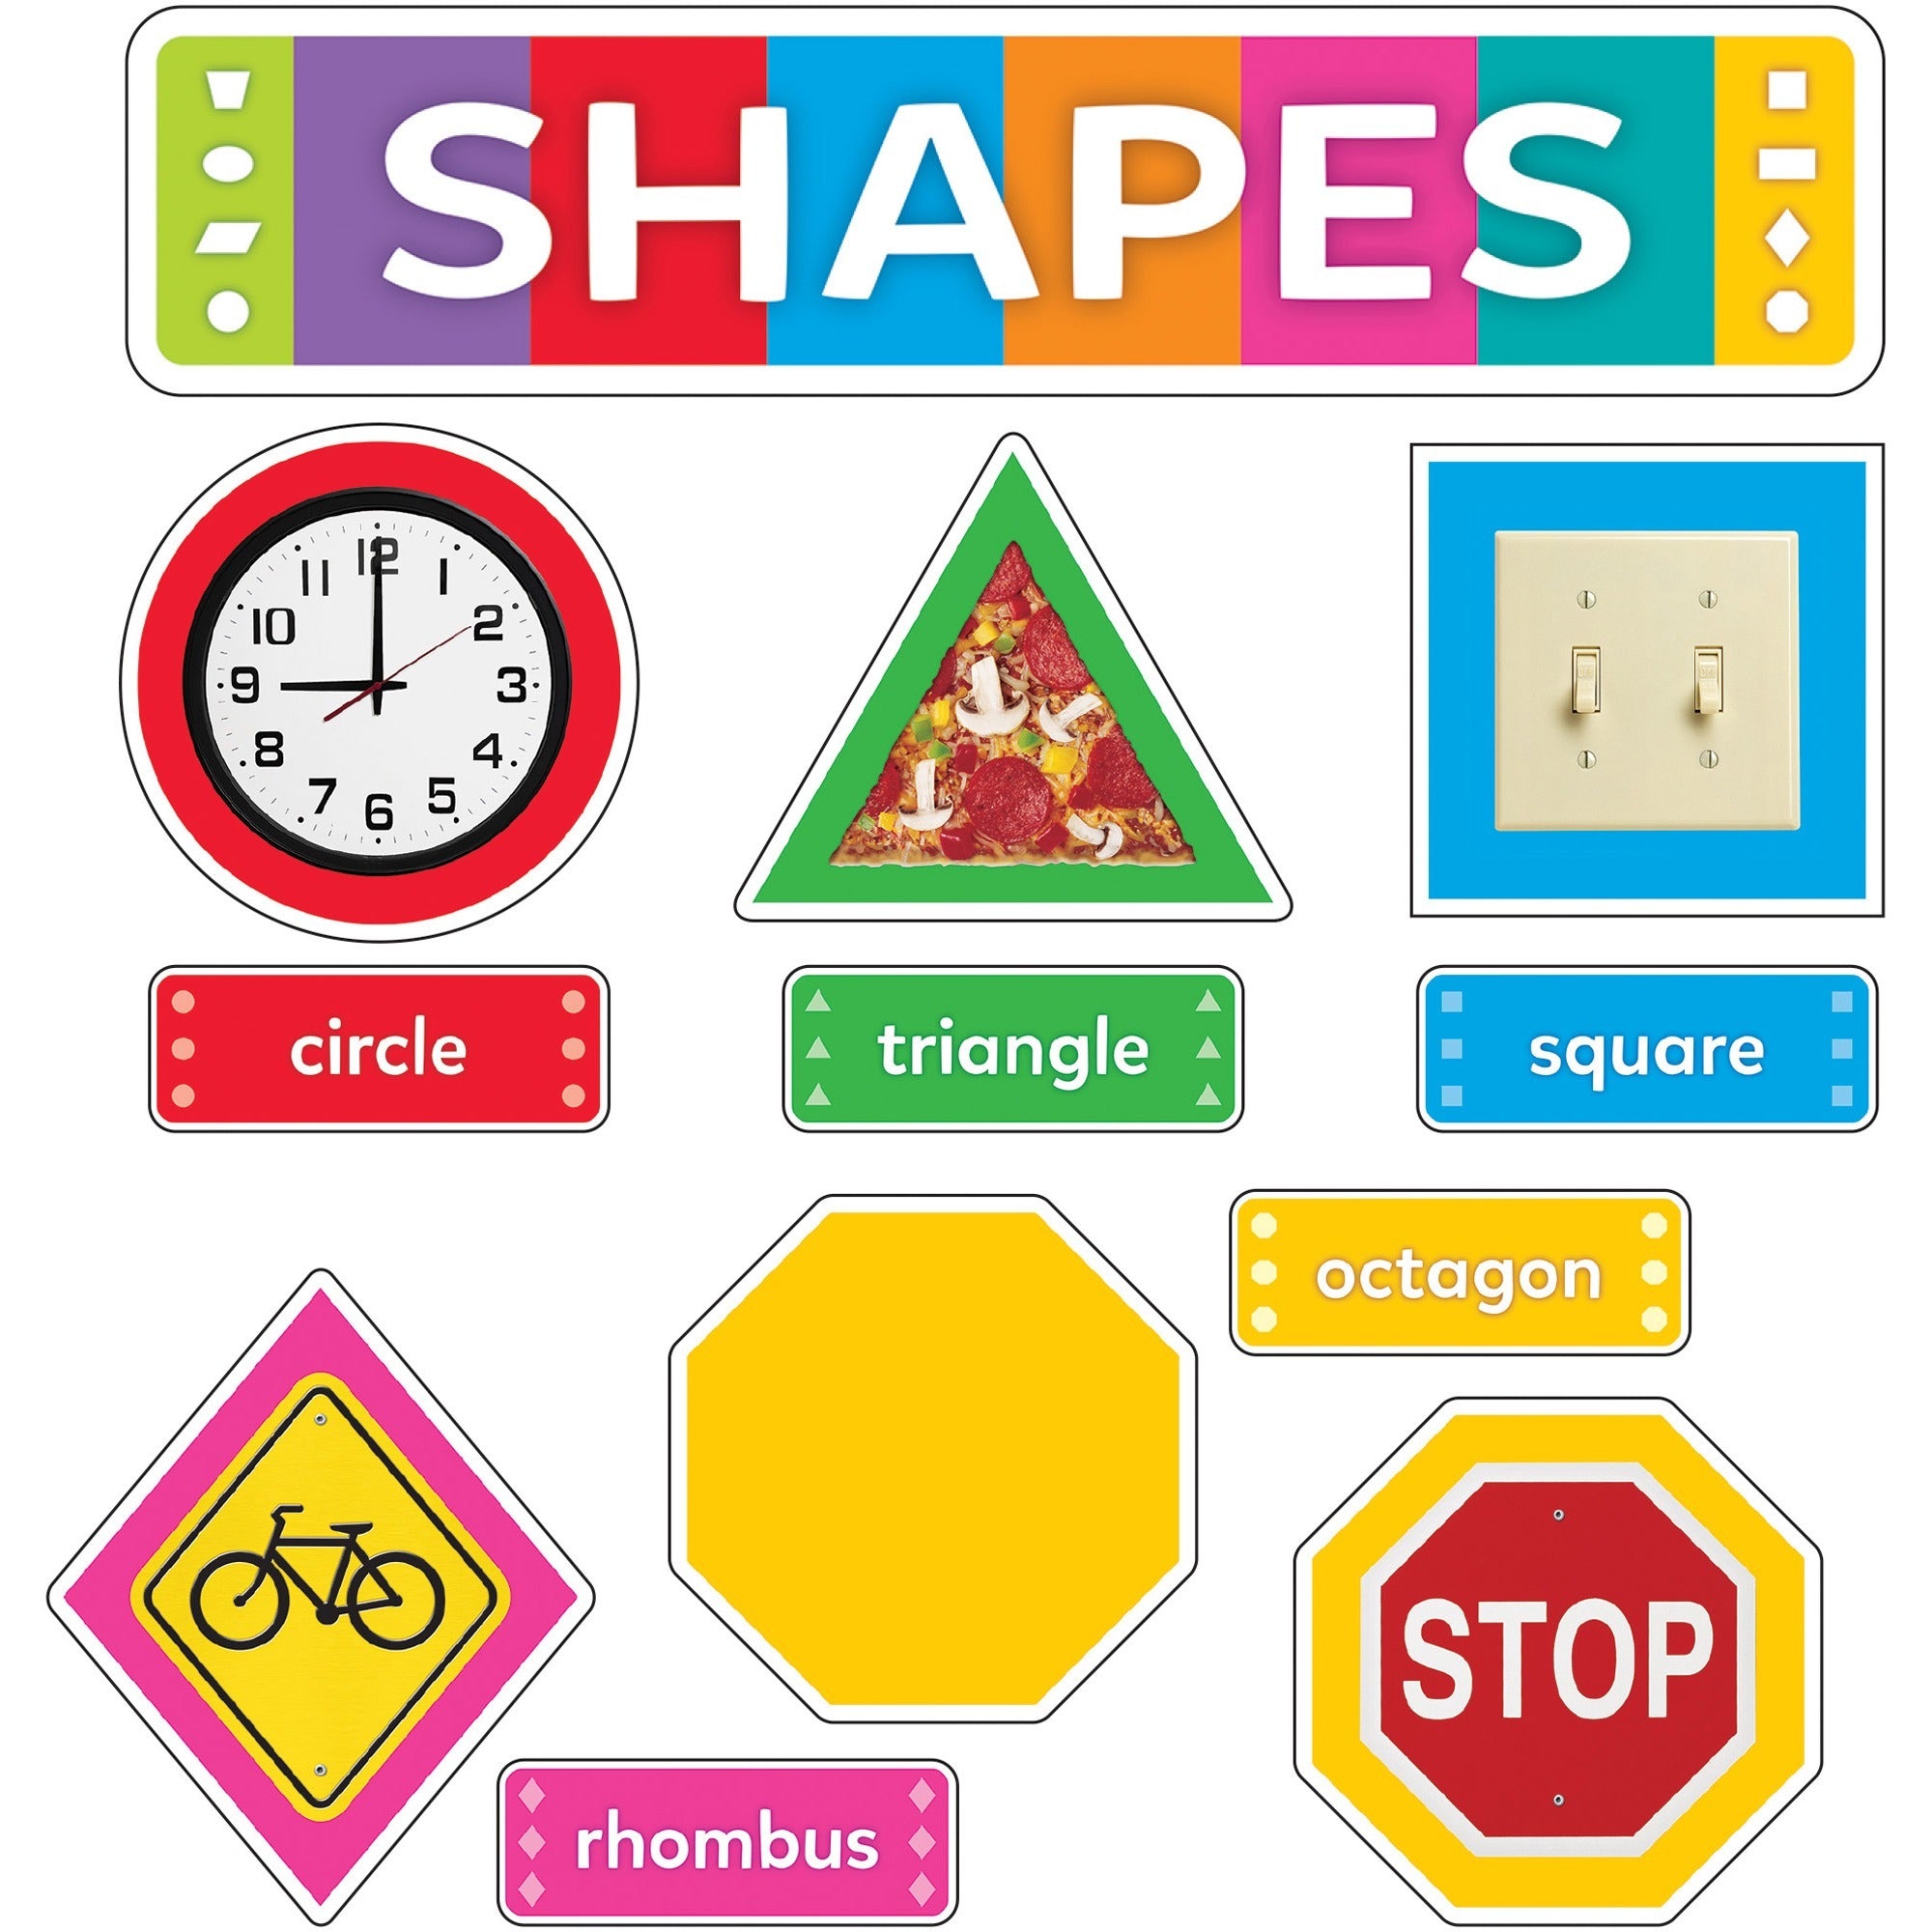 trend-shapes-all-around-us-learning-set-learning-theme-subject-1-x-circle-1-x-triangle-1-x-square-1-x-oval-1-x-octagon-1-x-parallelogram-1-x-rhombus-1-x-rectangle-1-x-trapezoid-shape-durable-reusable-sturdy-multi-1-each_tept19004 - 1